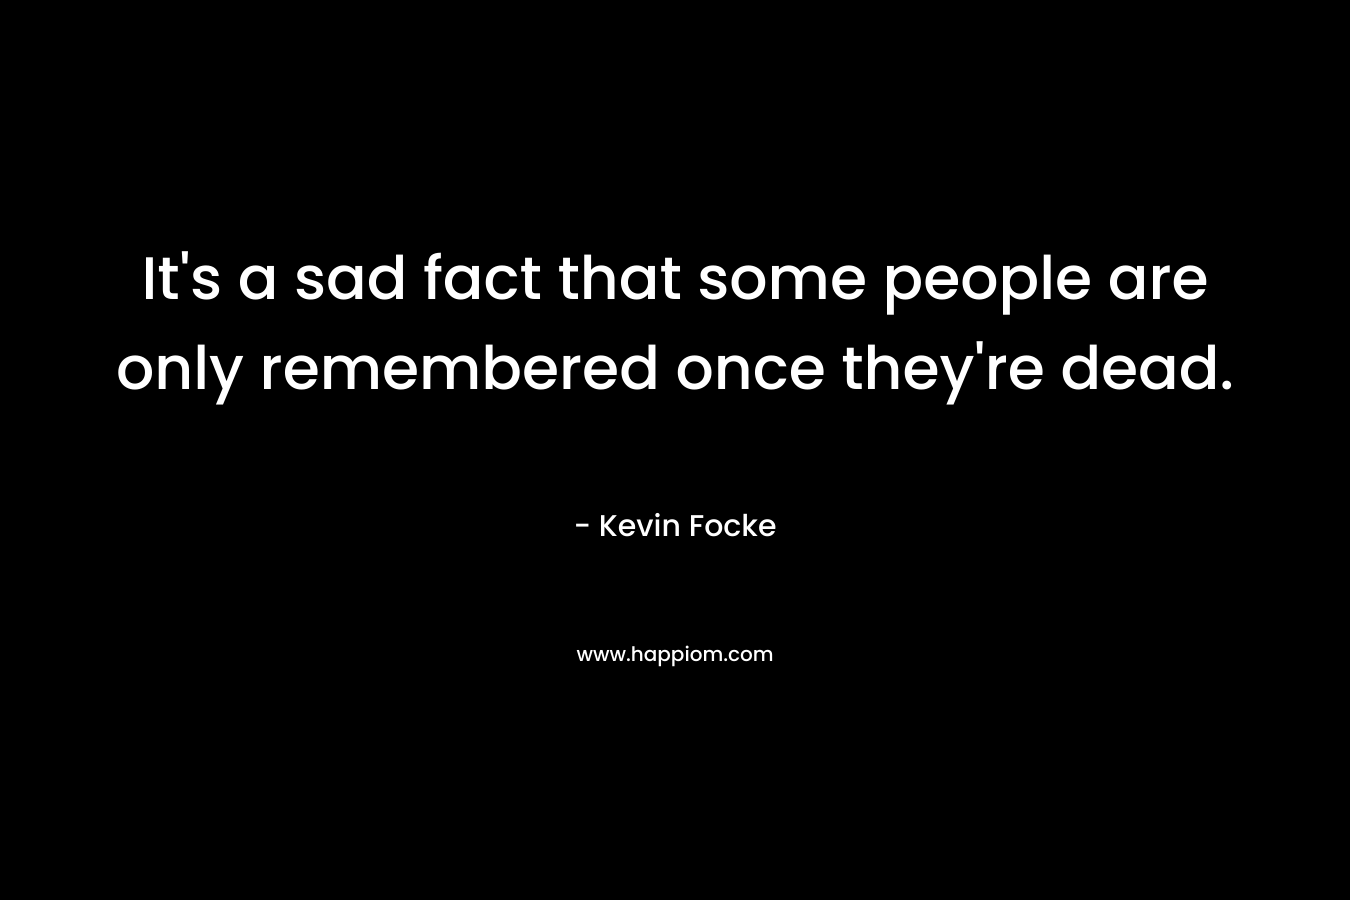 It’s a sad fact that some people are only remembered once they’re dead. – Kevin Focke